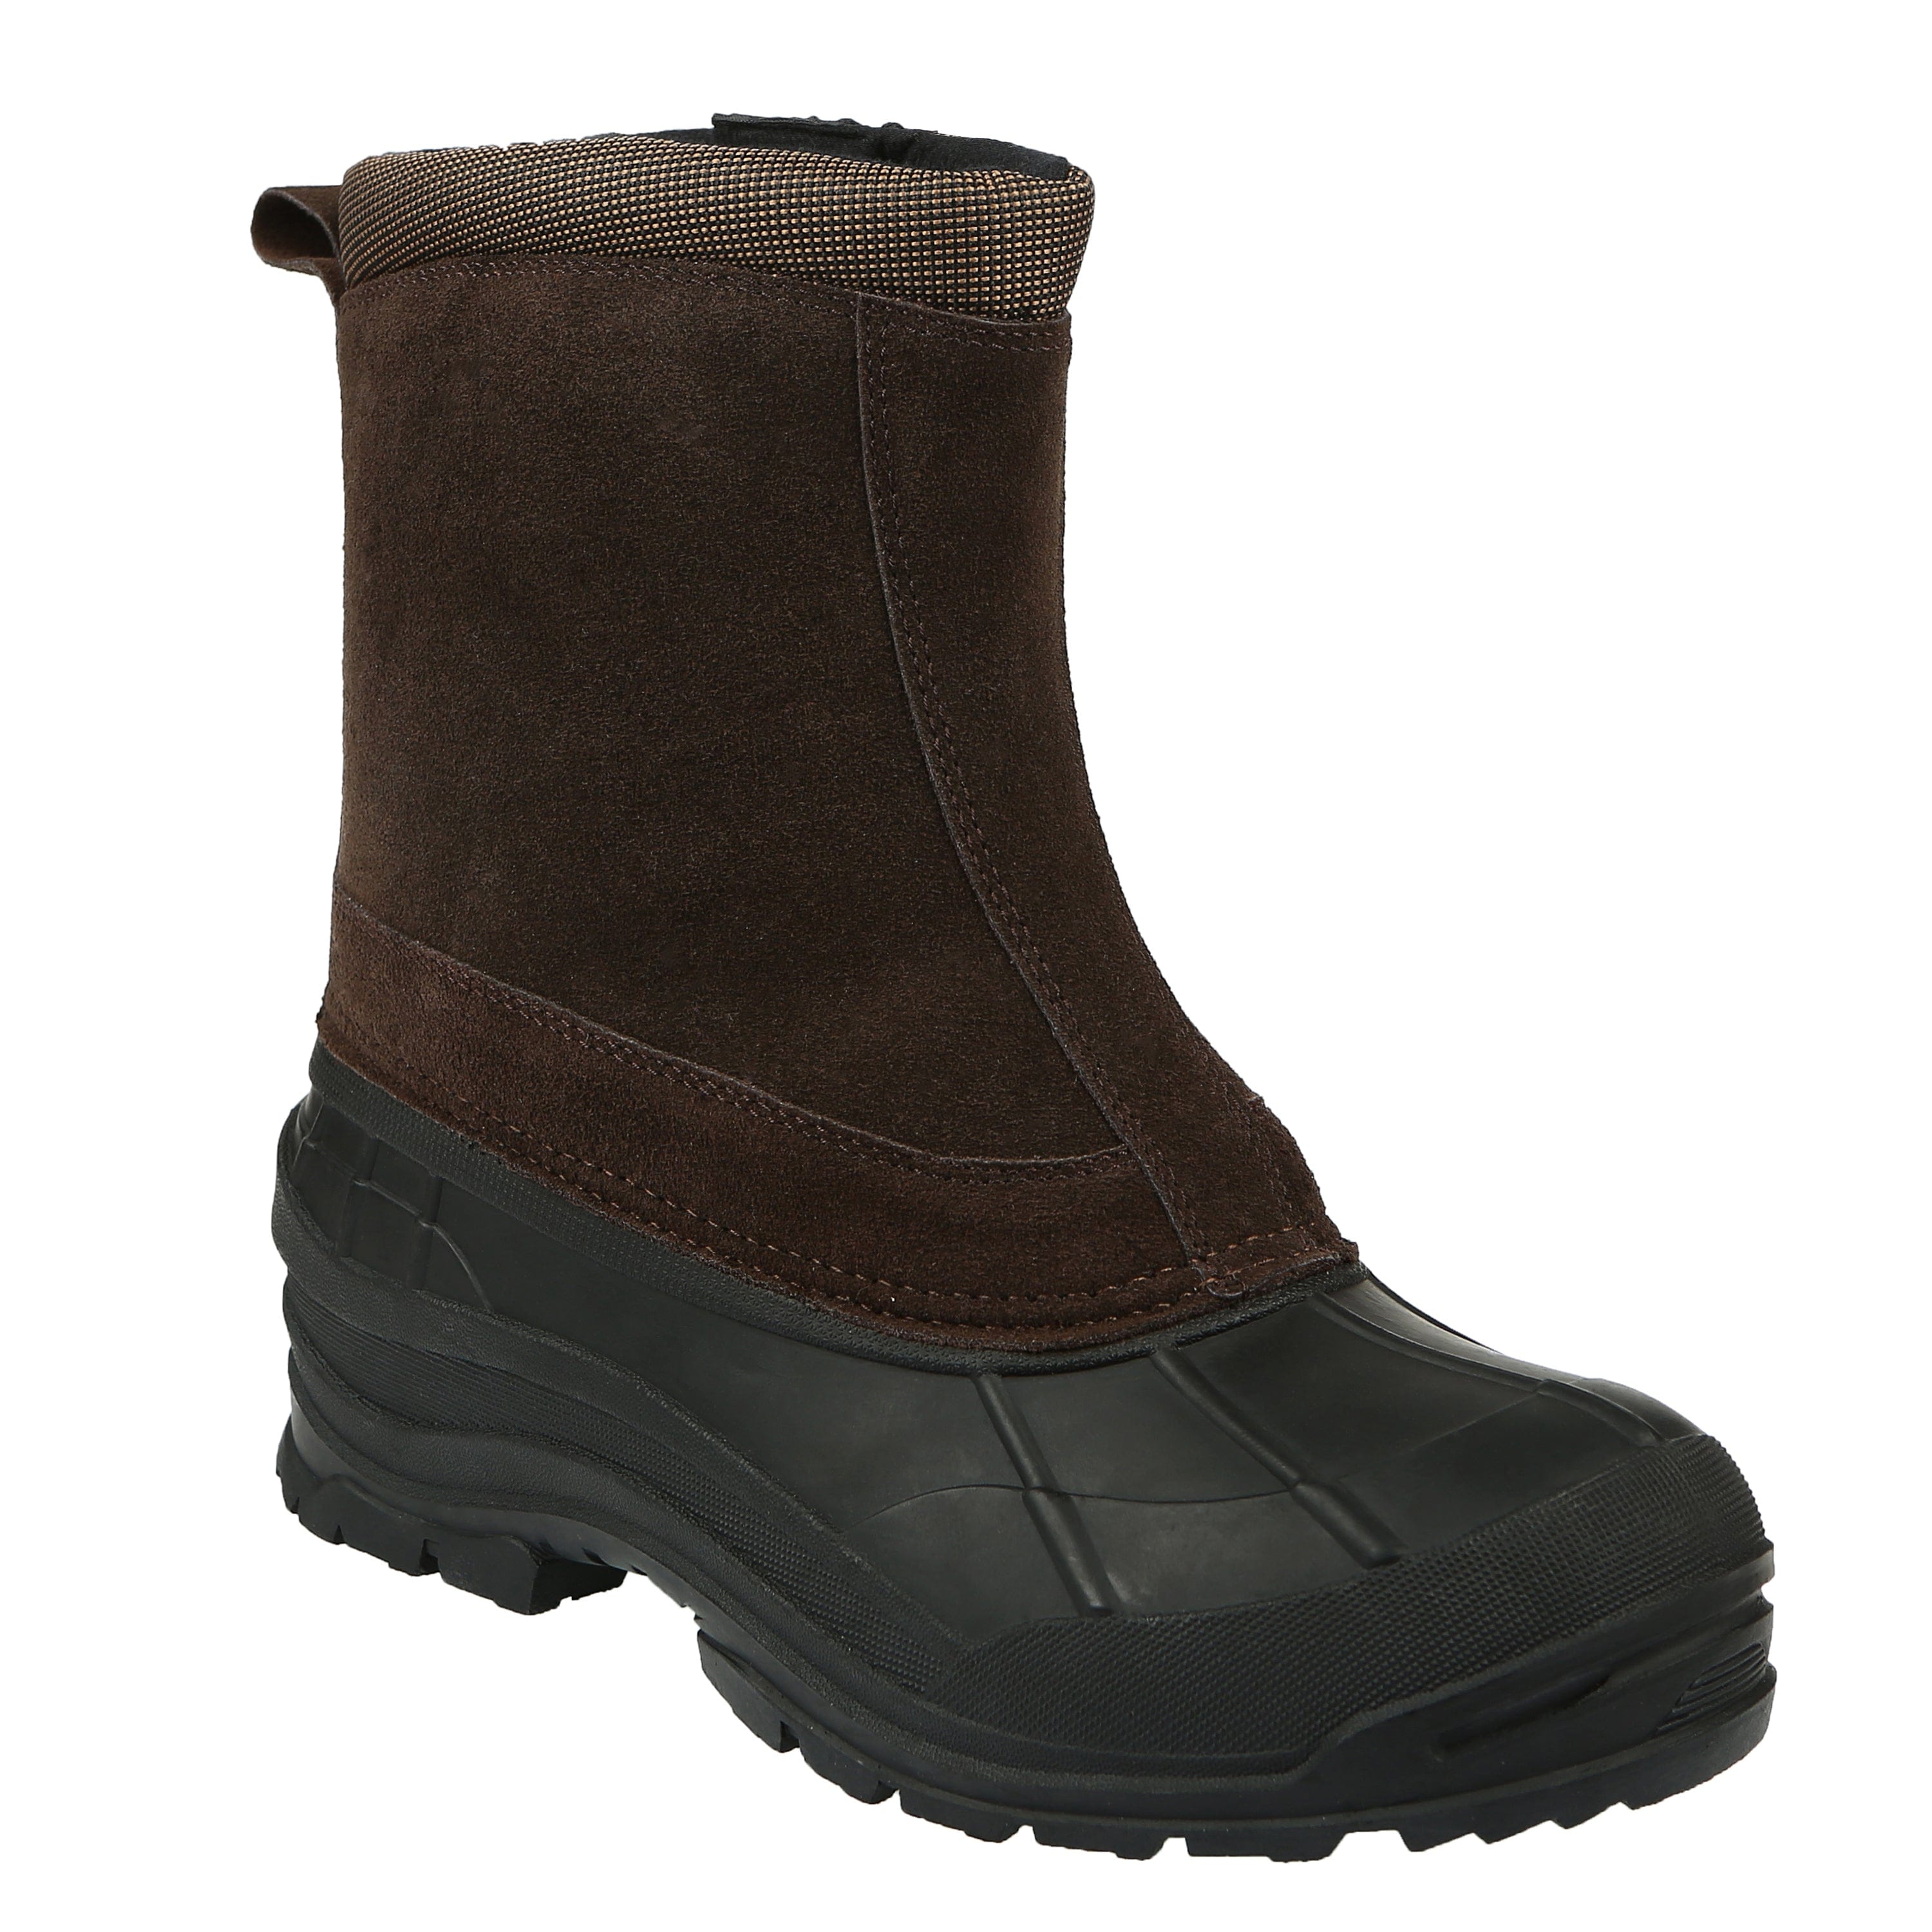 Men's Albany Insulated Winter Snow Boot - Northside USA